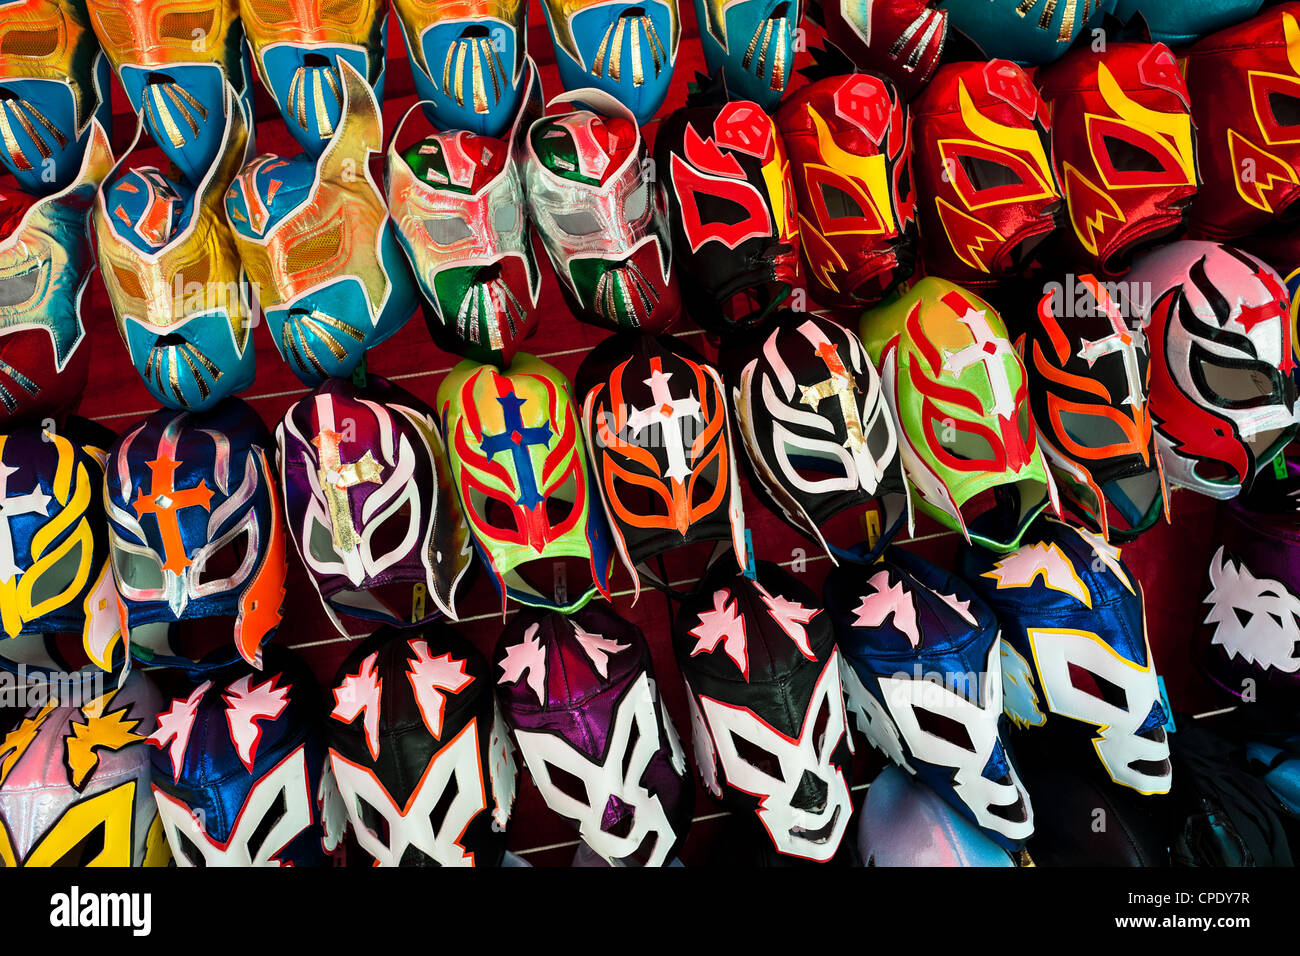 Colorful Lucha libre (Mexican wrestling) masks for sale on a stall at a local arena in Mexico City, Mexico. Stock Photo